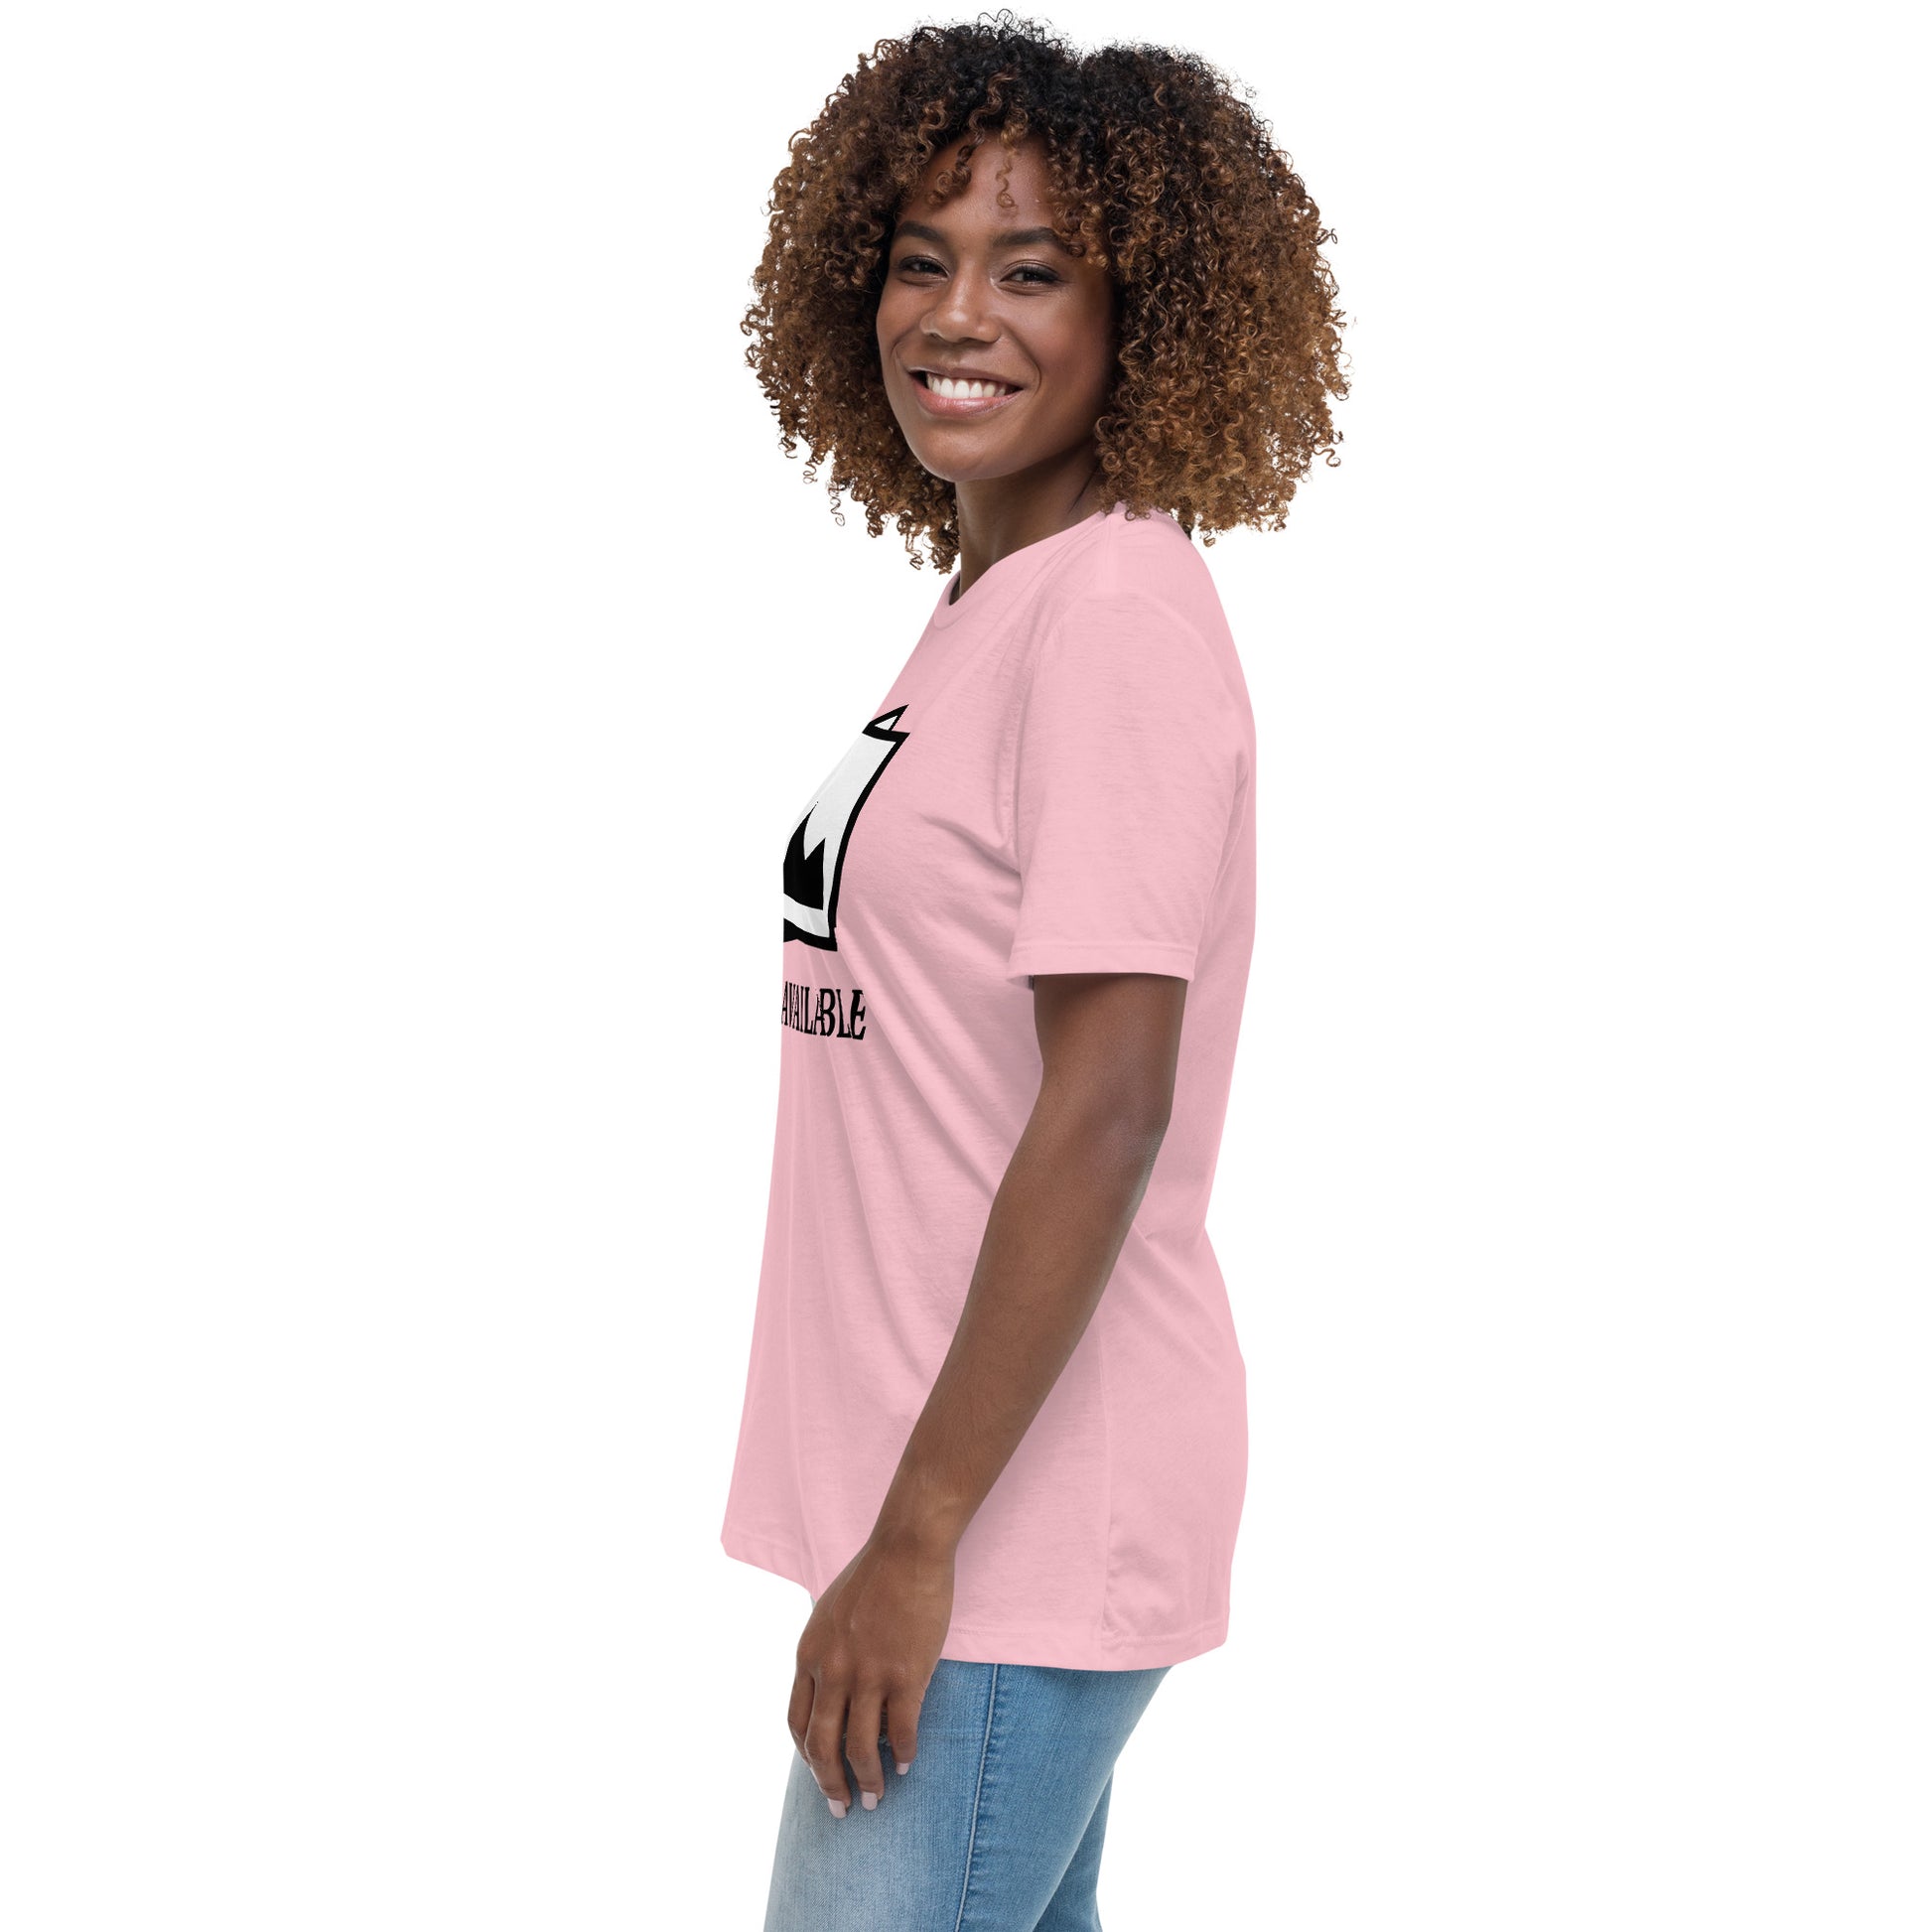 Women with pink t-shirt with image and text "no image available"